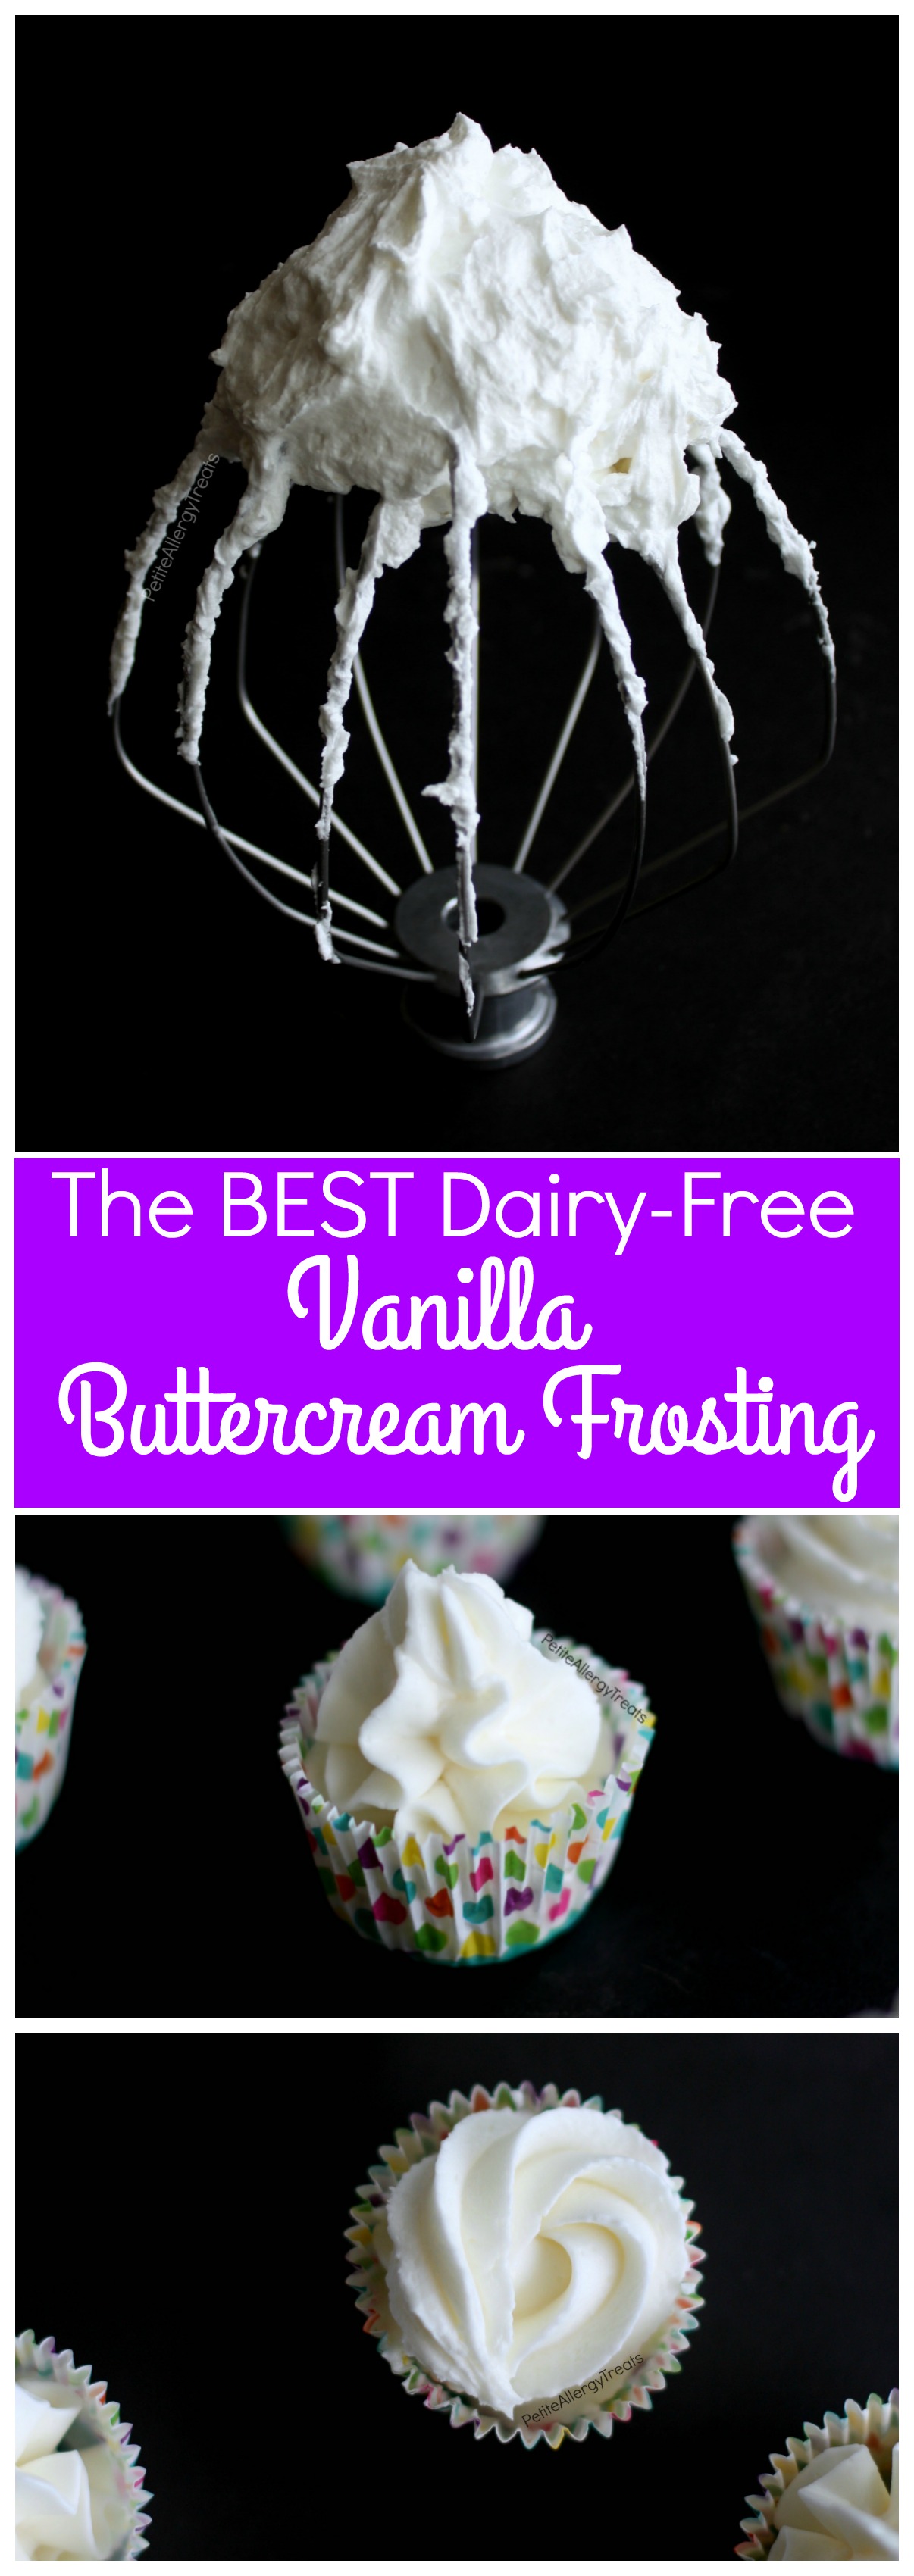 Best Dairy Free Buttercream Recipe- Easy vegan vanilla buttercream, perfect for decorating cakes! Food allergy friendly.